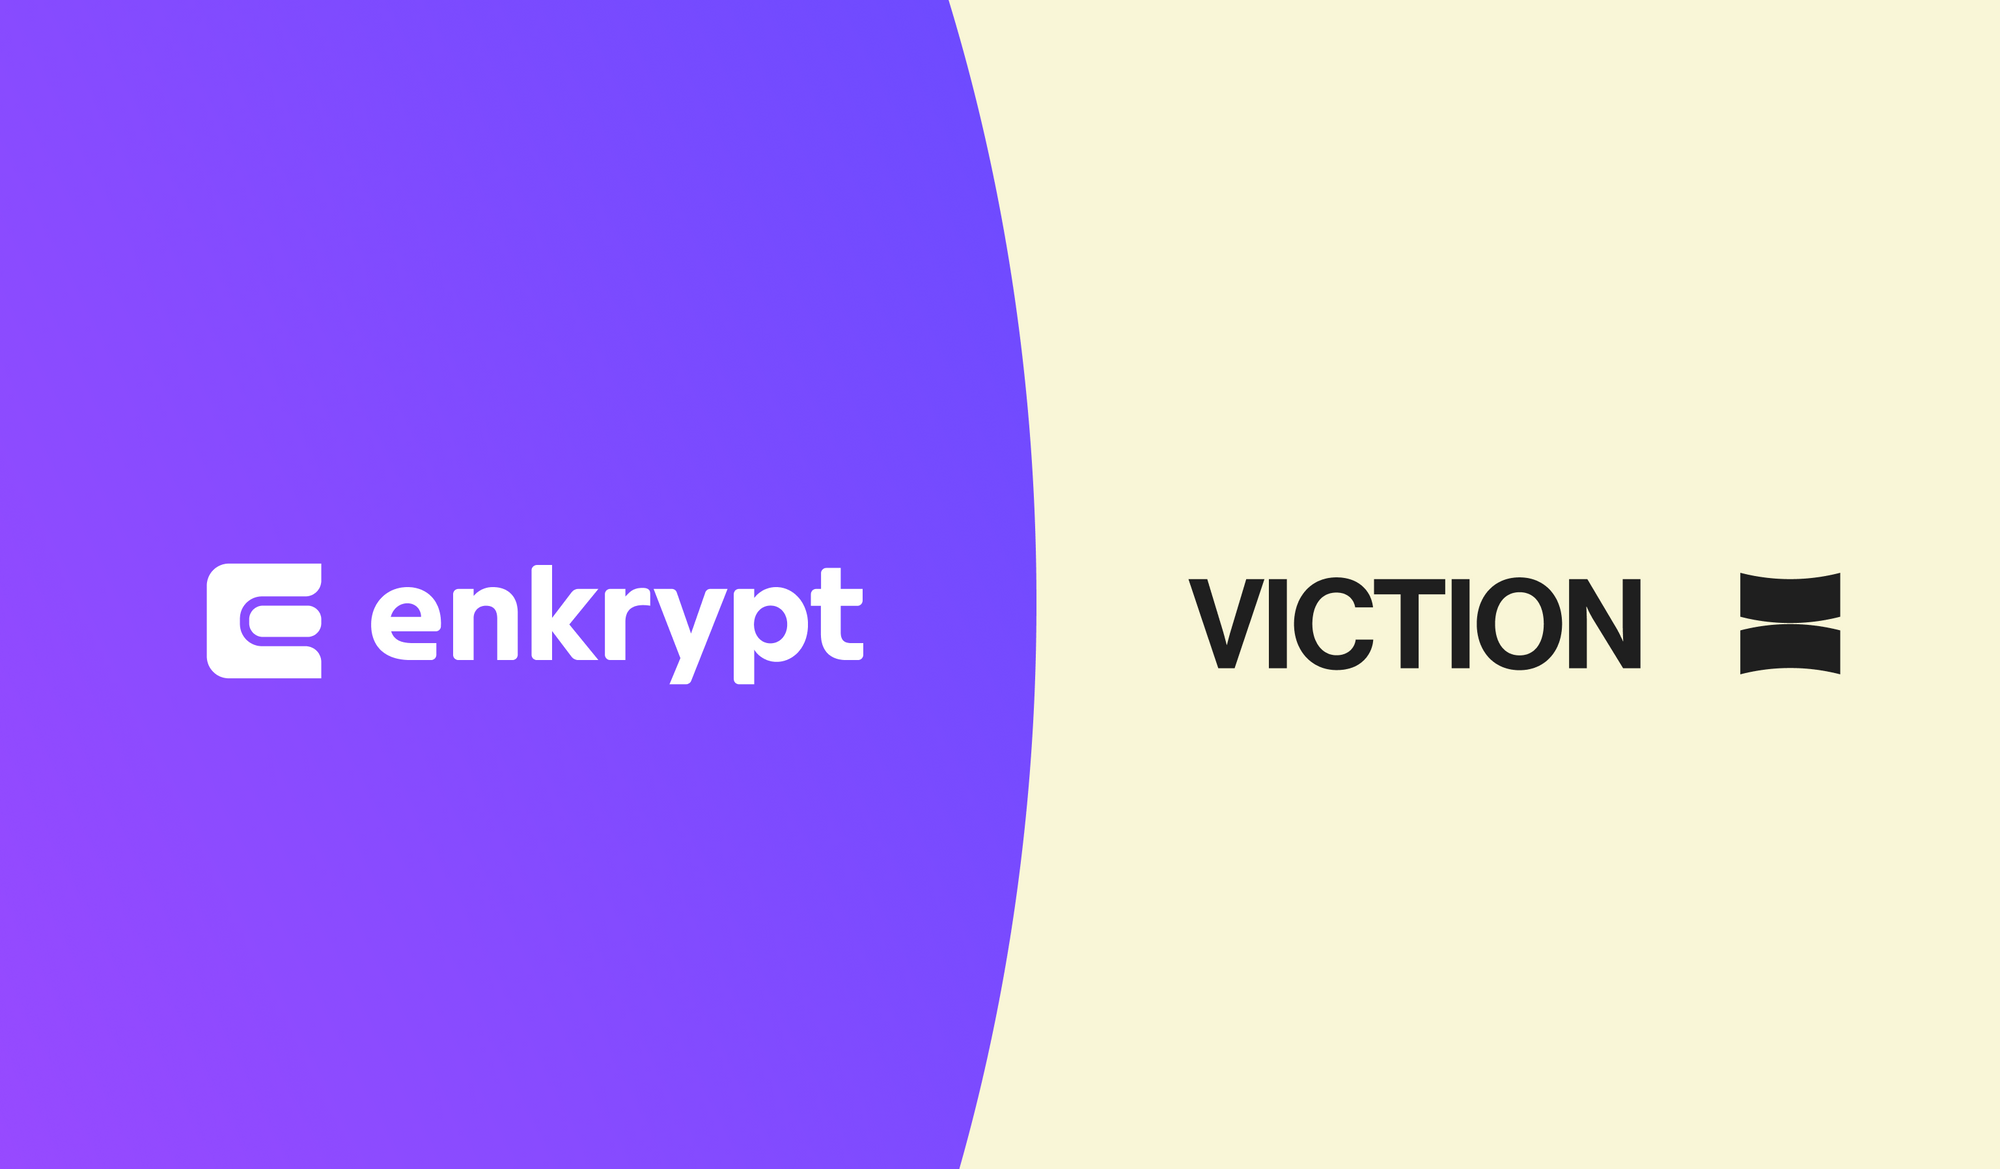 Interacting with Viction using Enkrypt